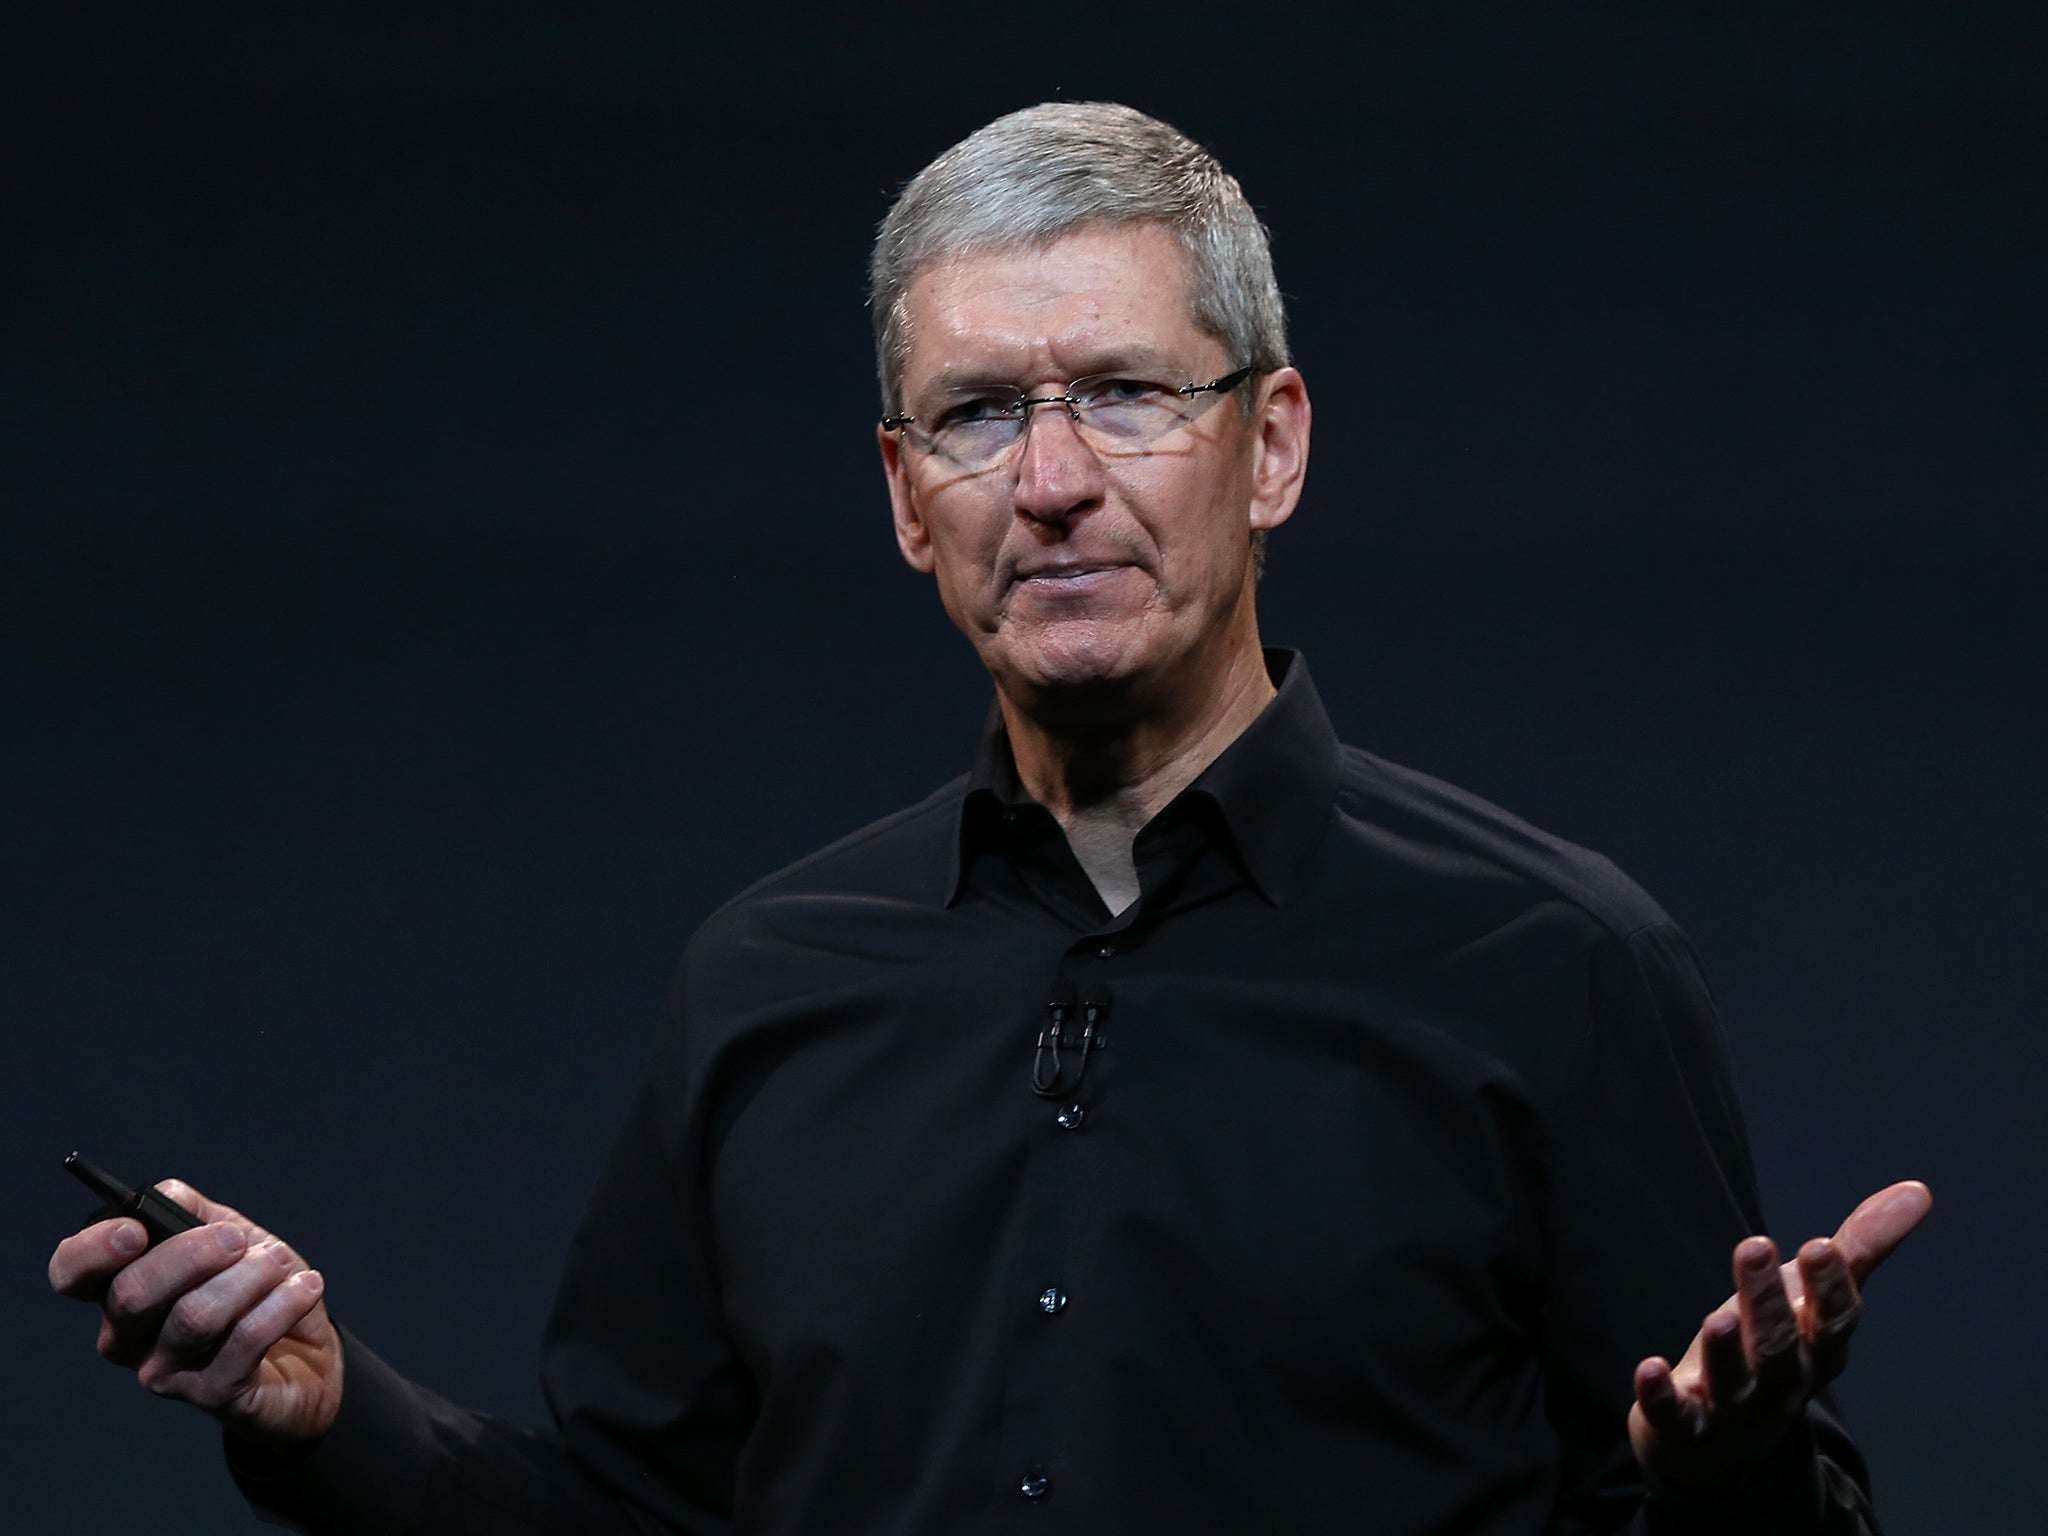 Tim Cook promises to shake up the keynote speakers at WWDC this year